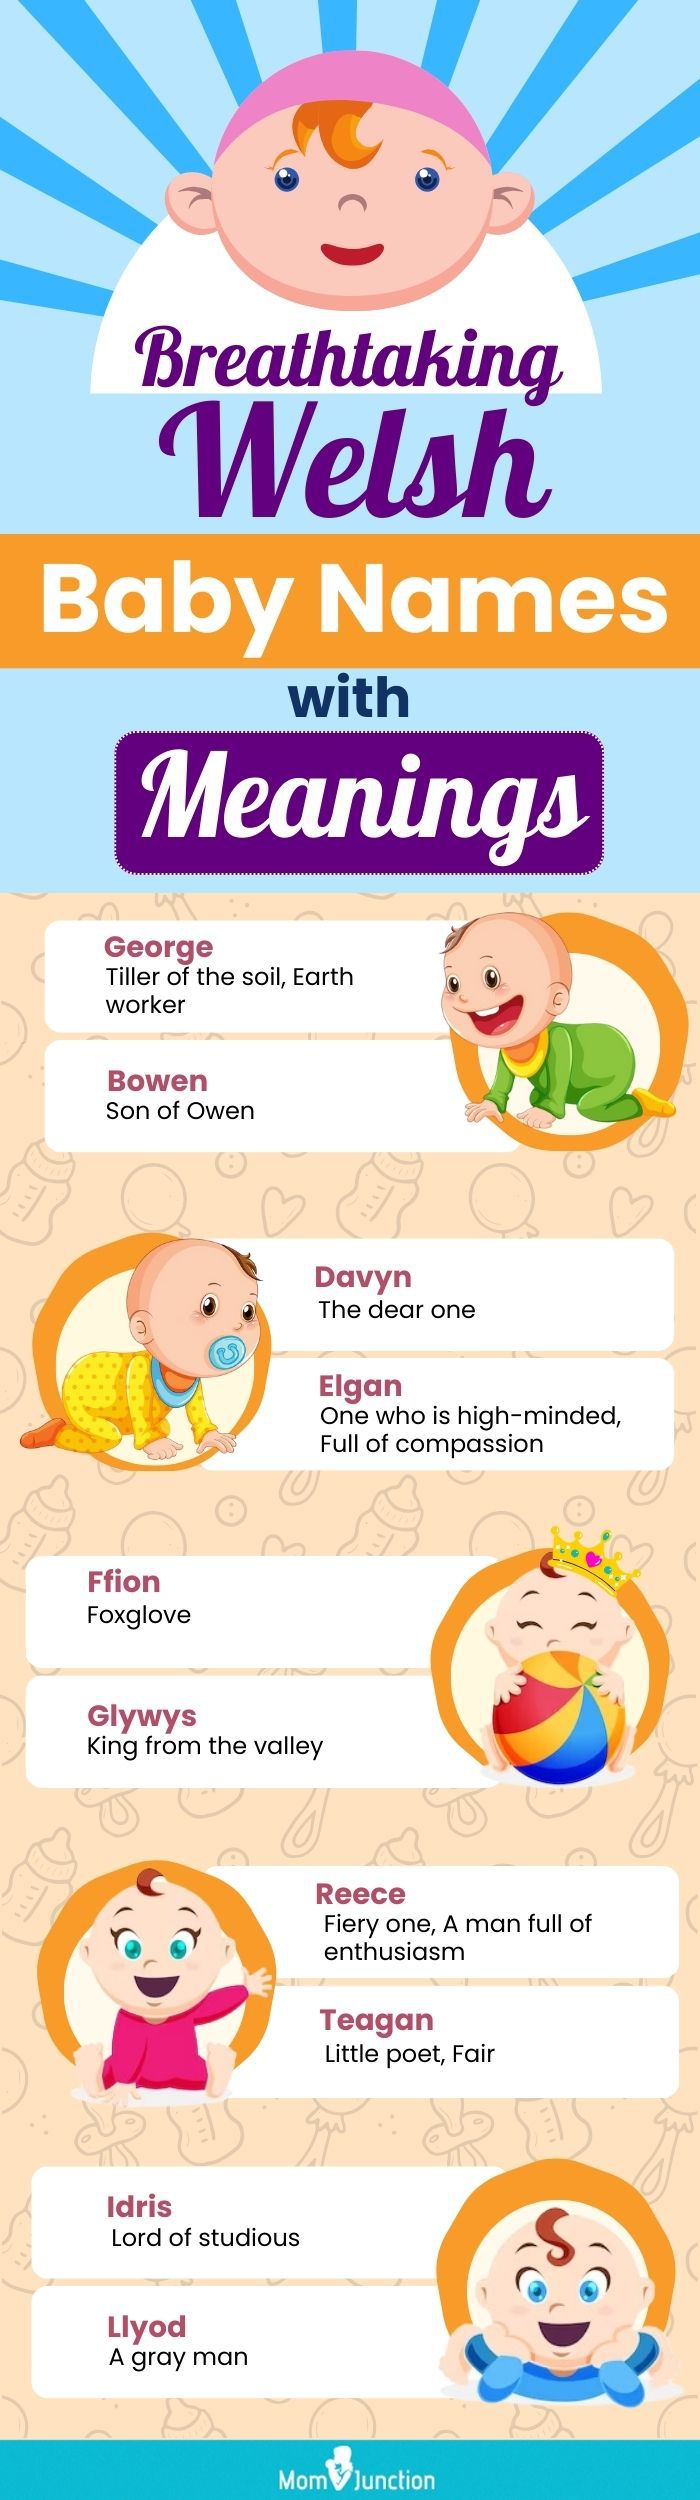 breathtaking welsh baby names with meanings (infographic)